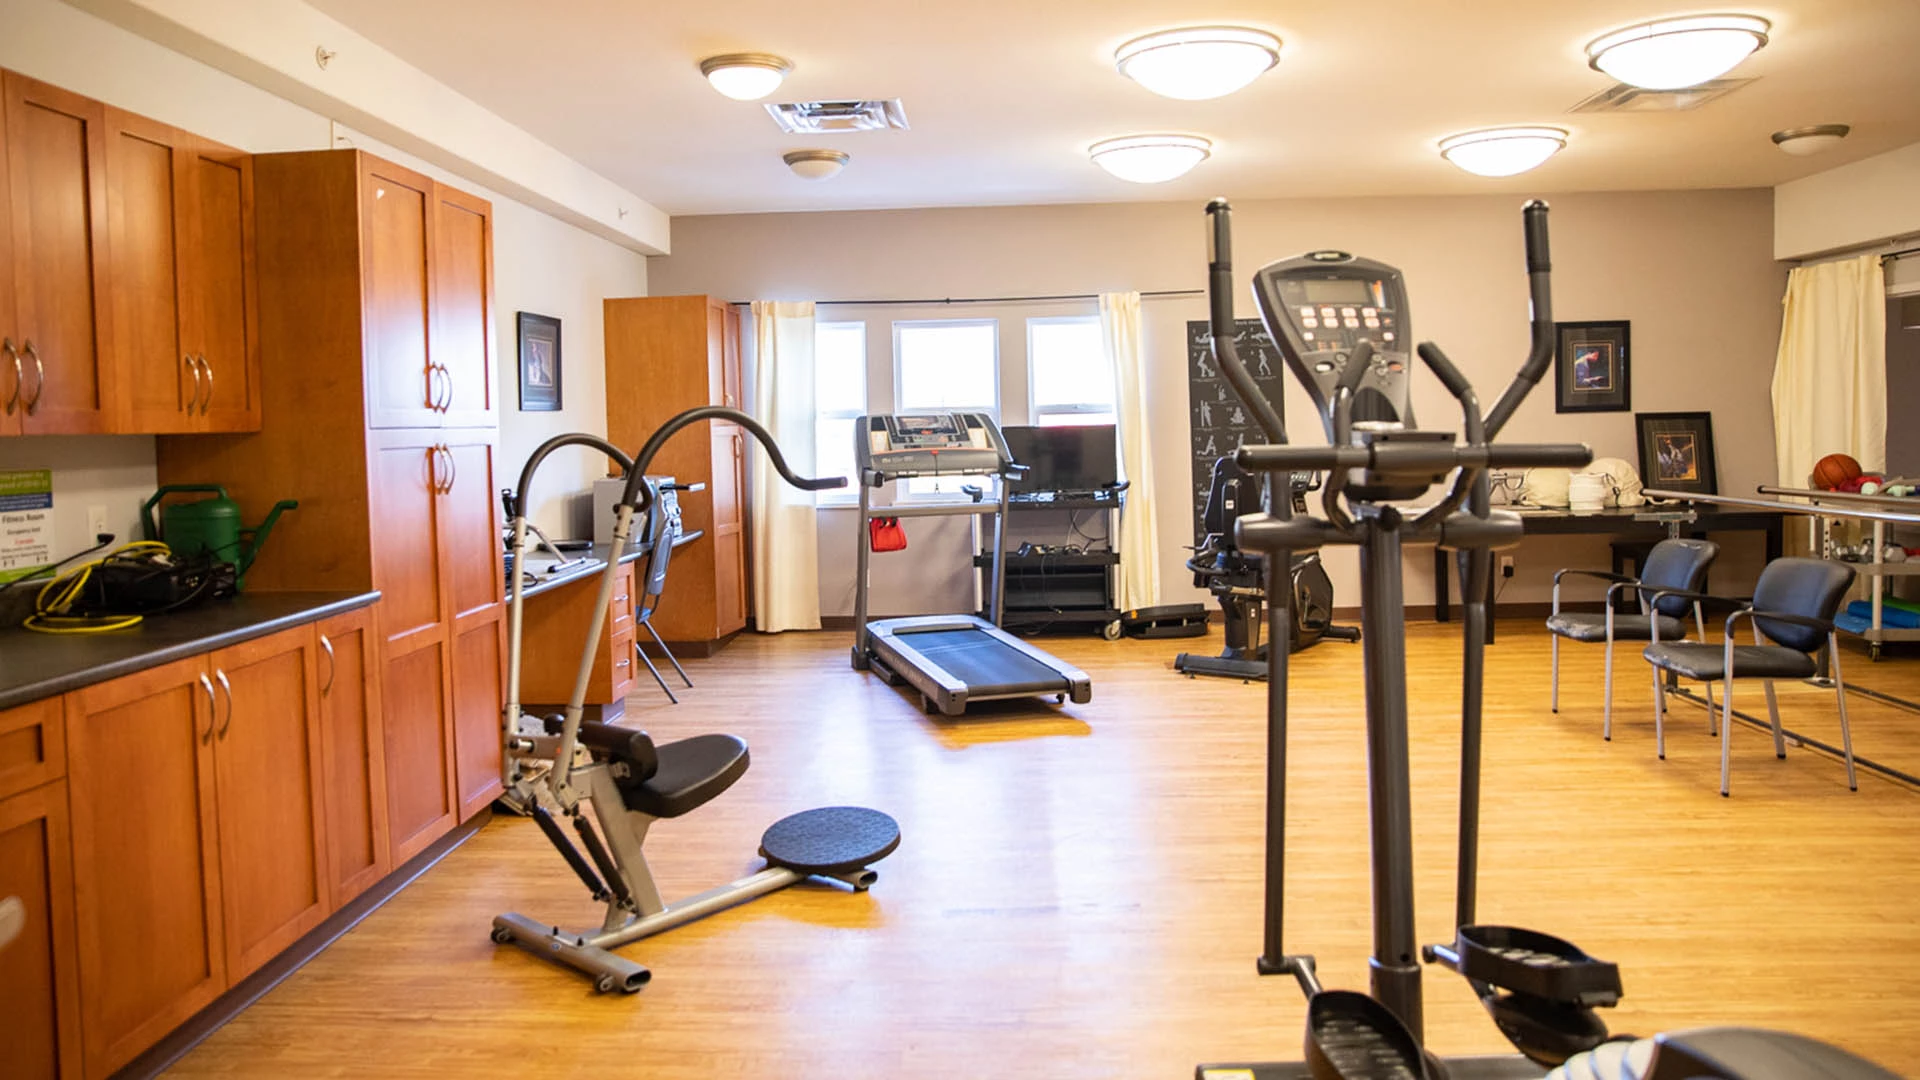 On-site fitness centre is available.